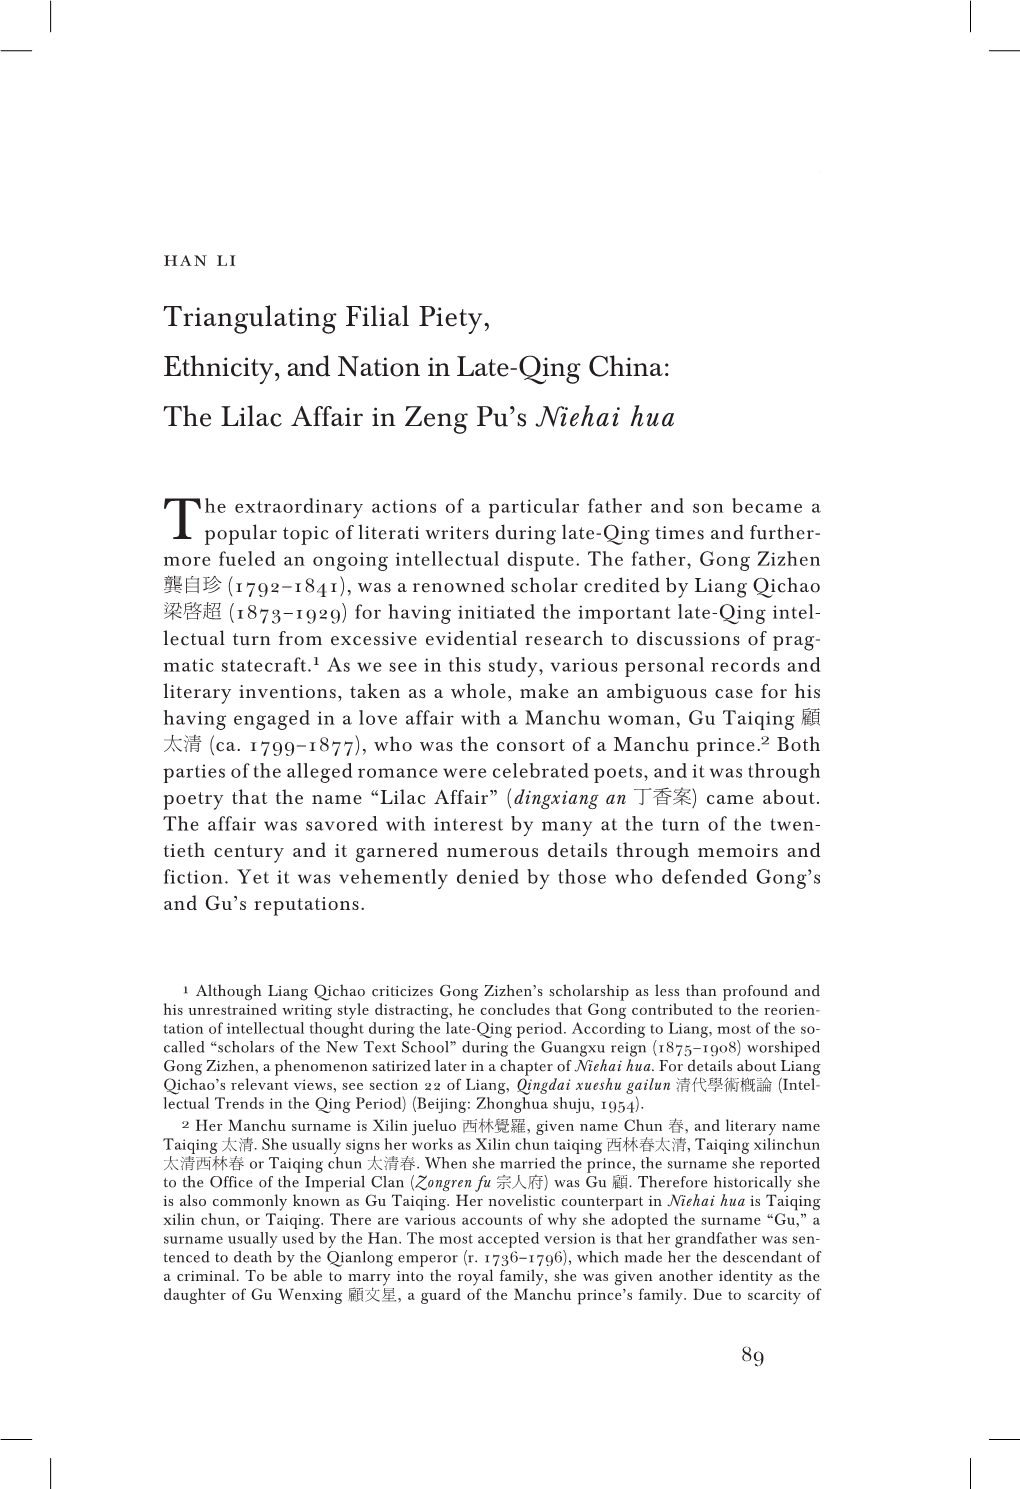 Triangulating Filial Piety, Ethnicity, and Nation in Late-Qing China: the Lilac Affair in Zeng Pu’S Niehai Hua